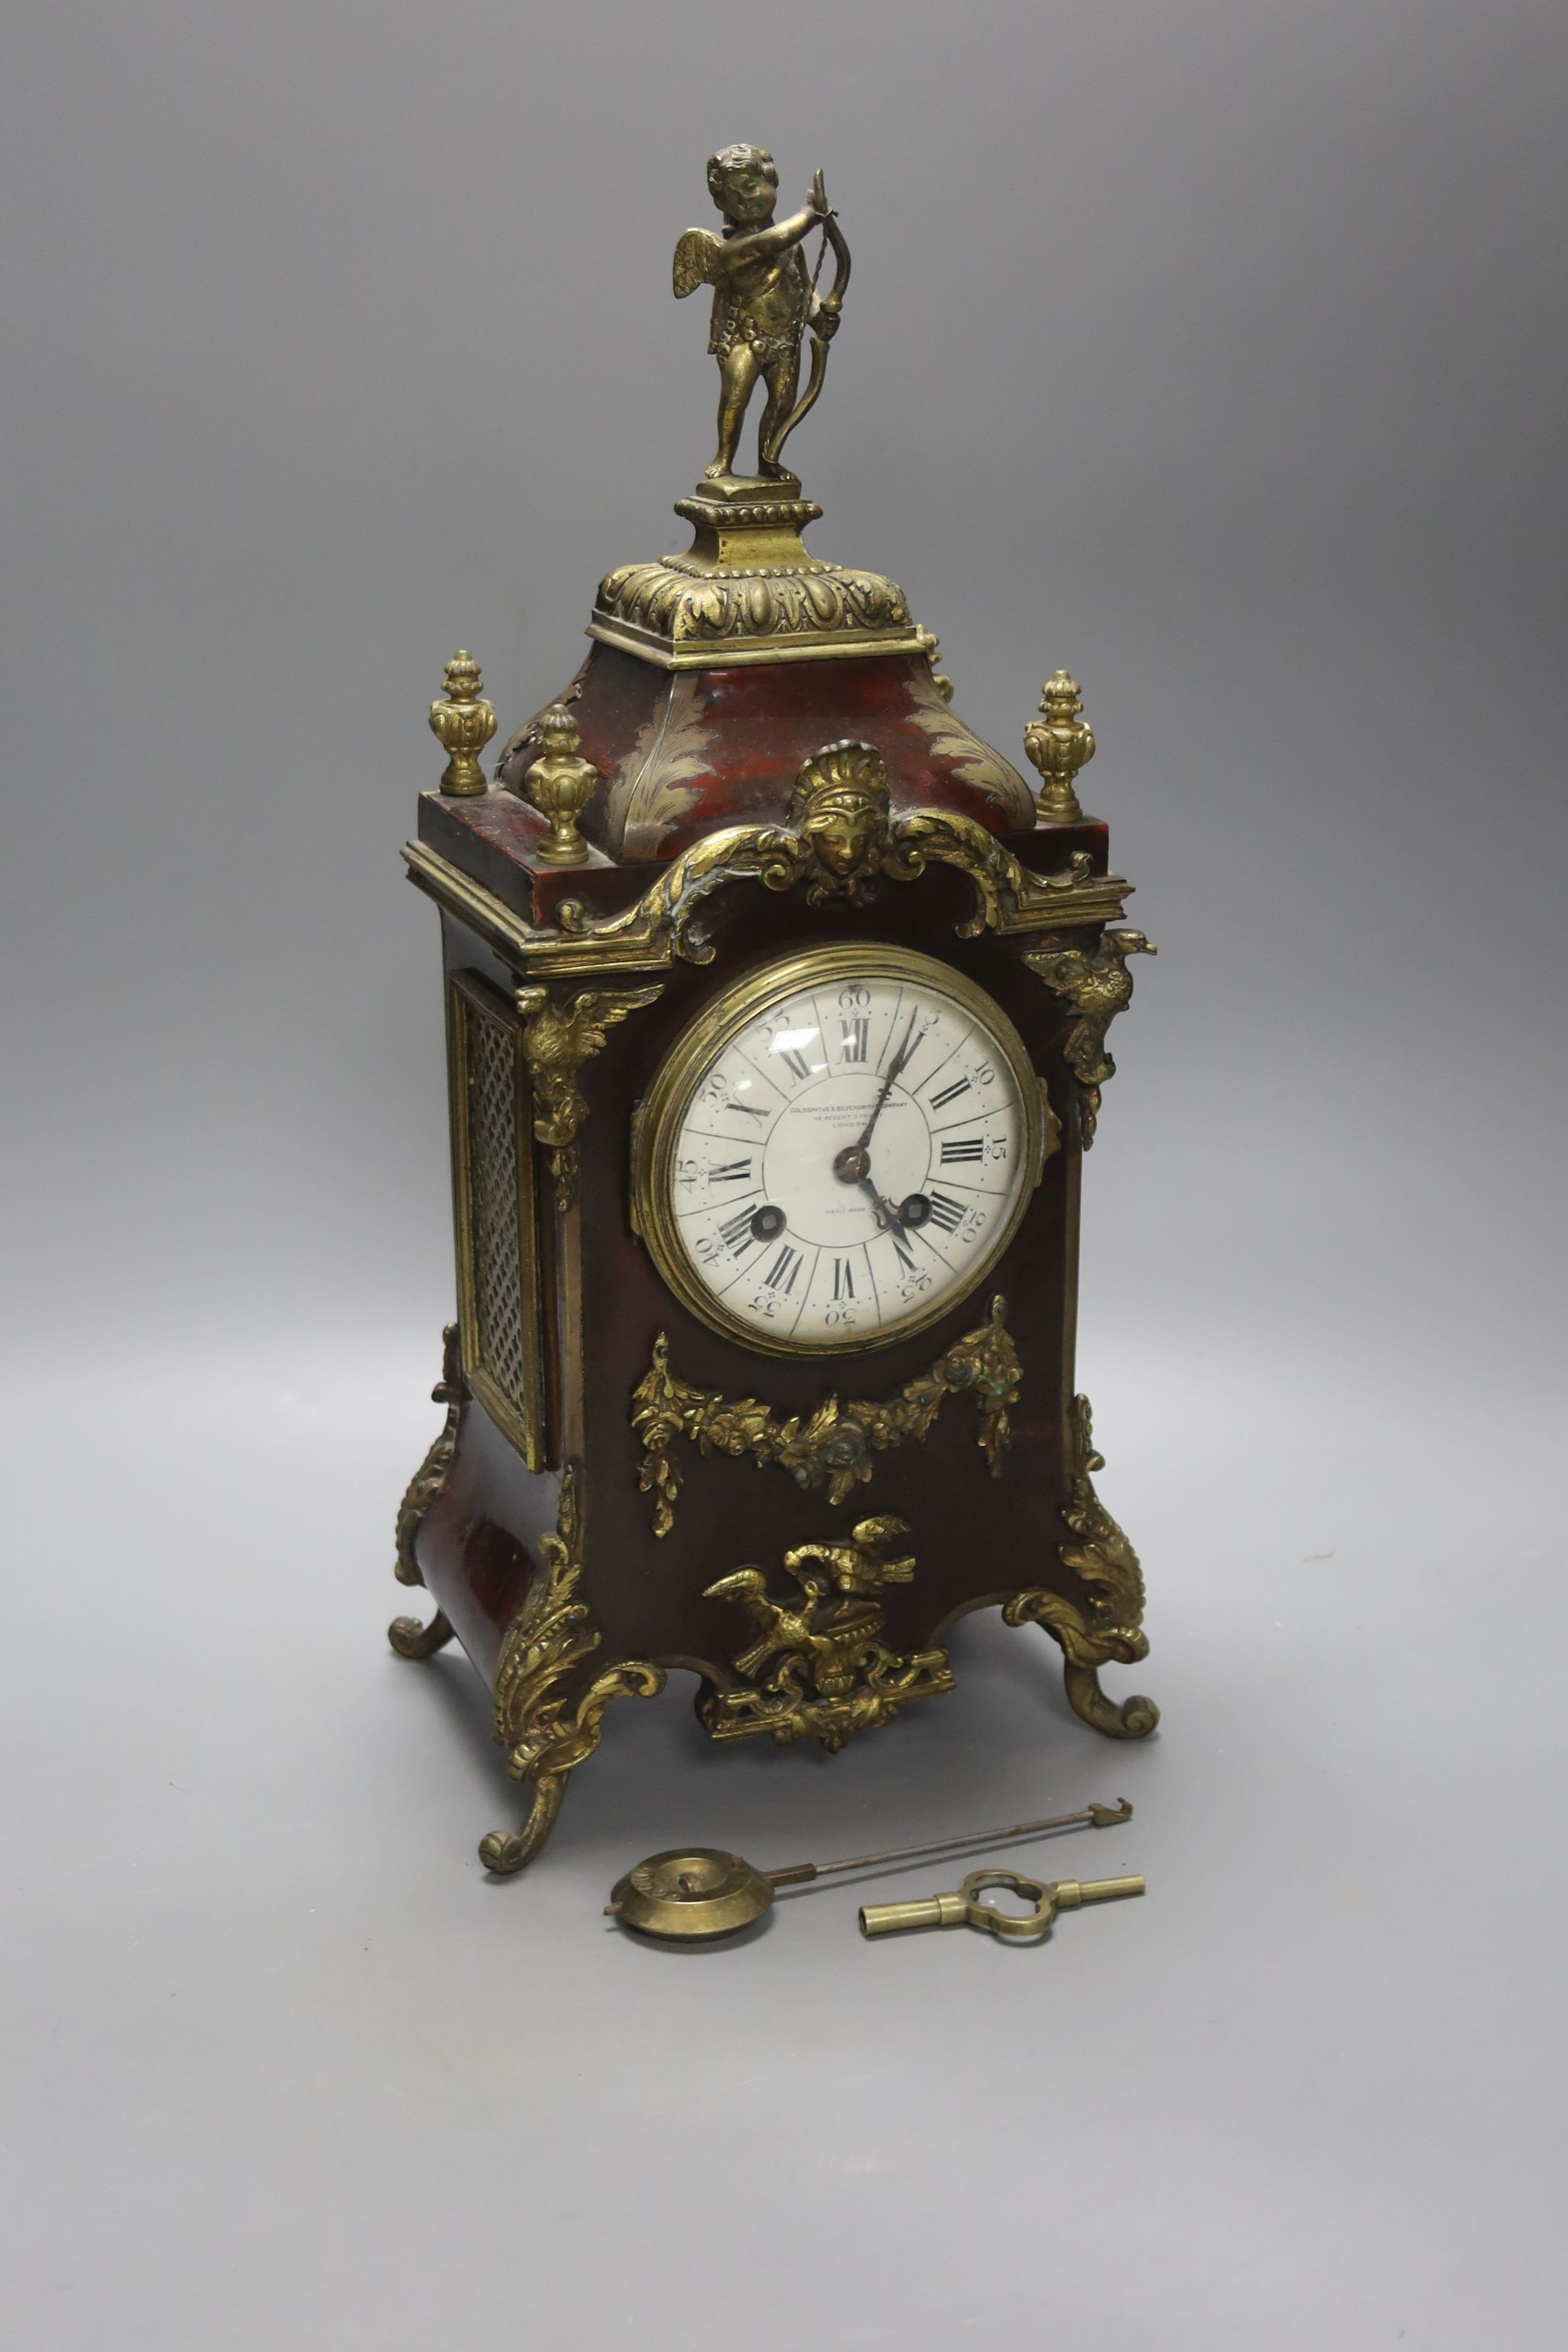 A 19th century French ormolu mounted boulle mantel clock, with key and pendulum, height 40cm